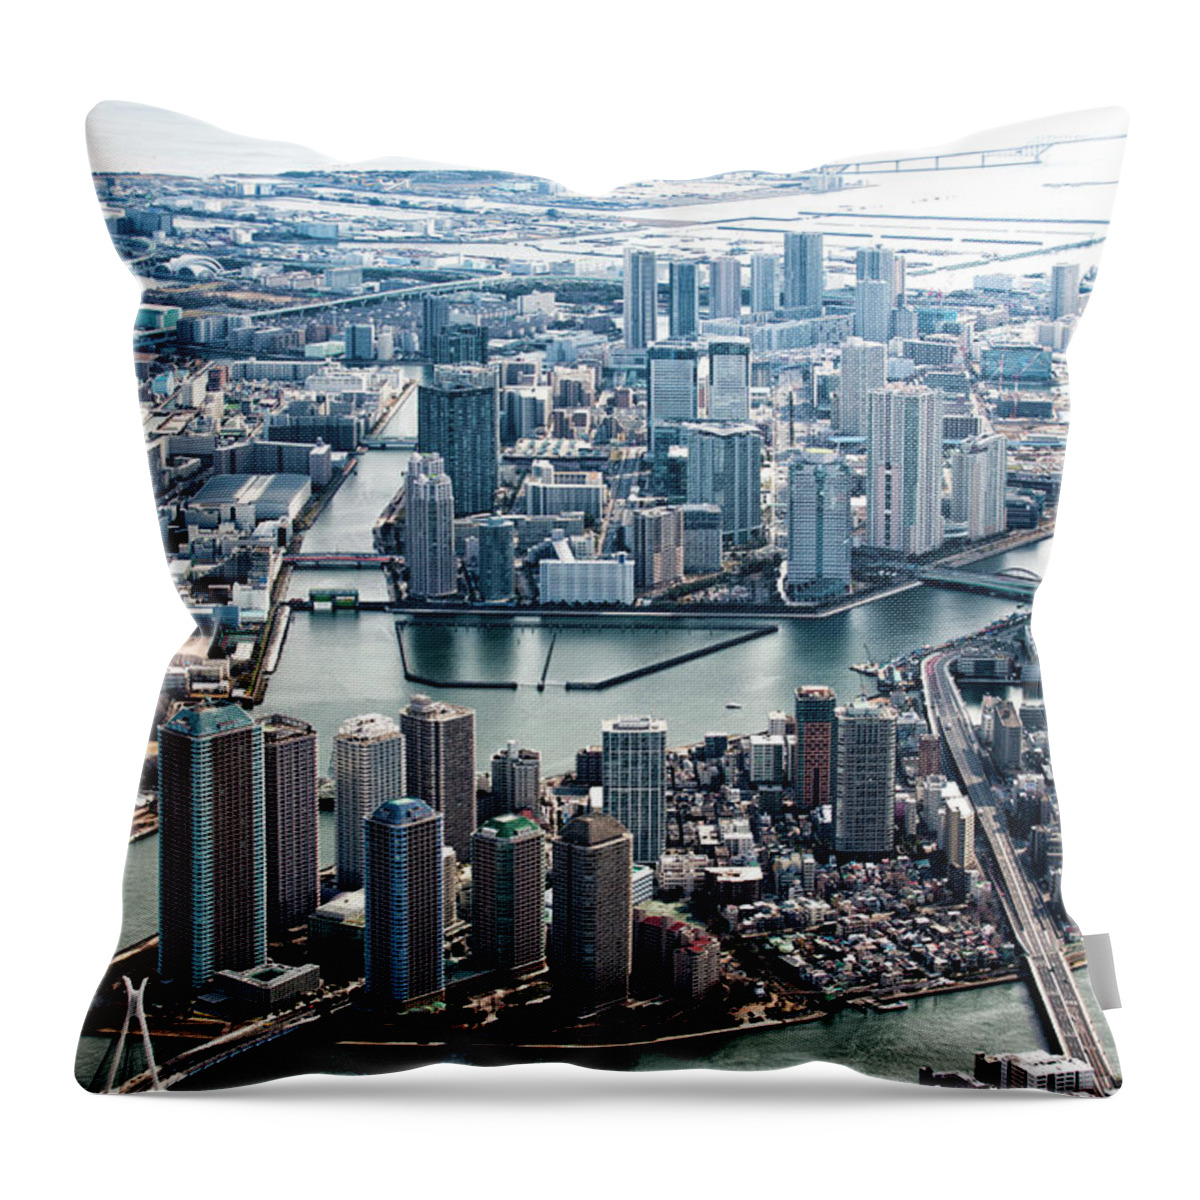 Cantilever Bridge Throw Pillow featuring the photograph Tokyo Gate Bridge And Skyscrapers In by Michael H